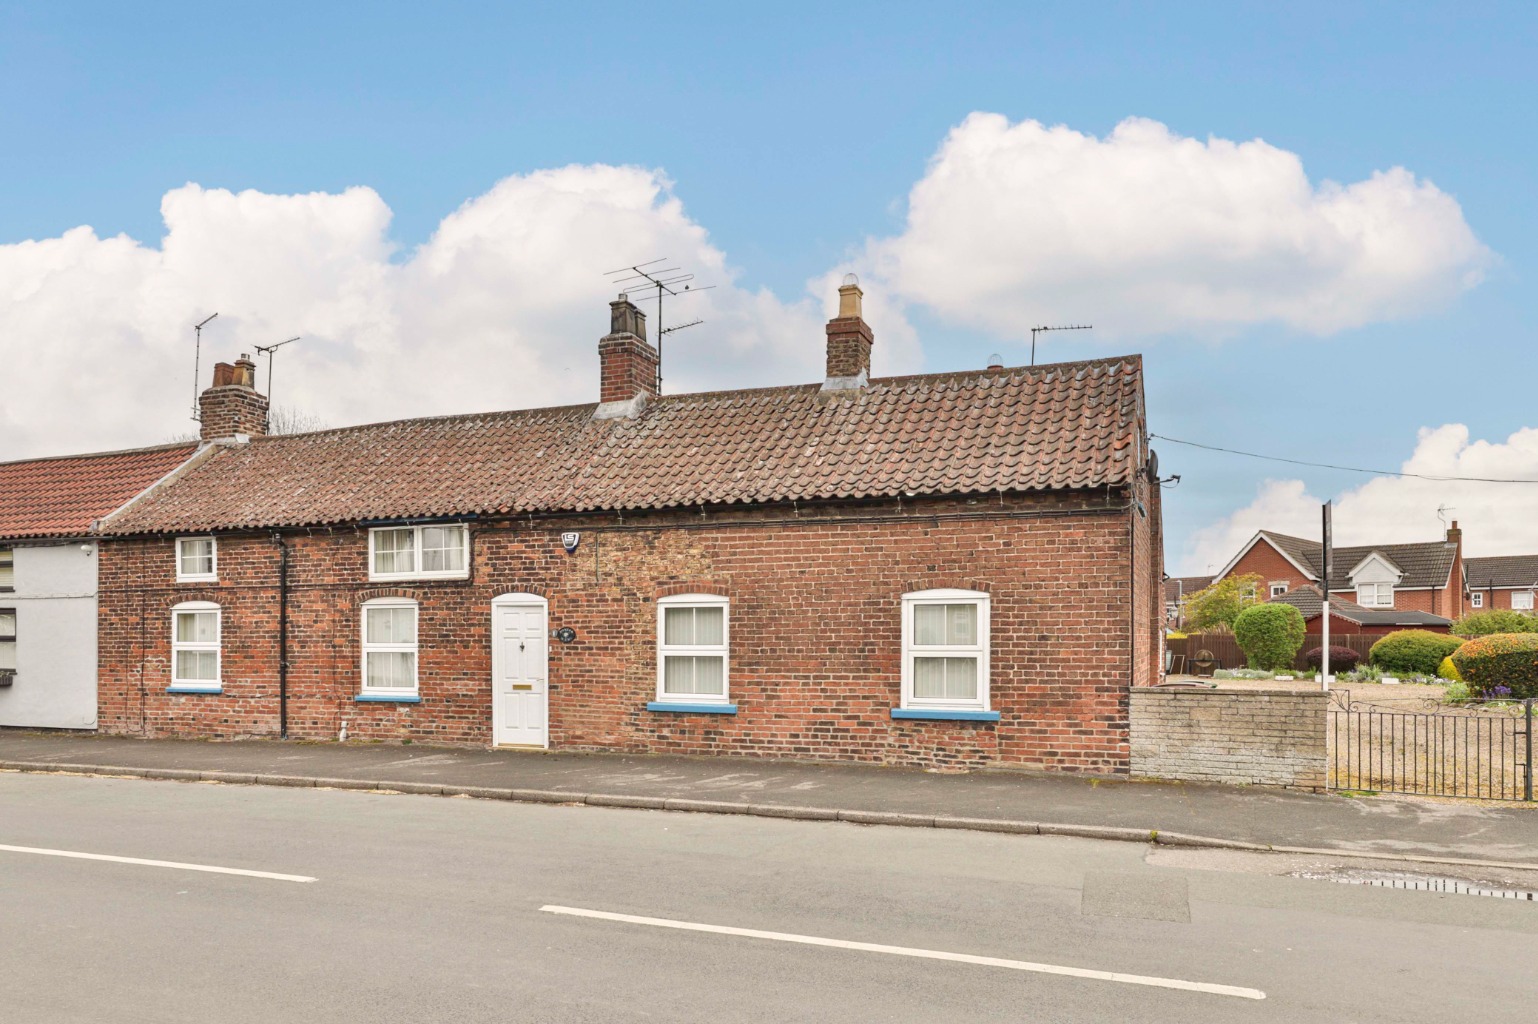 4 bed semi-detached house for sale in Joiners Shop Row, Hull - Property Image 1